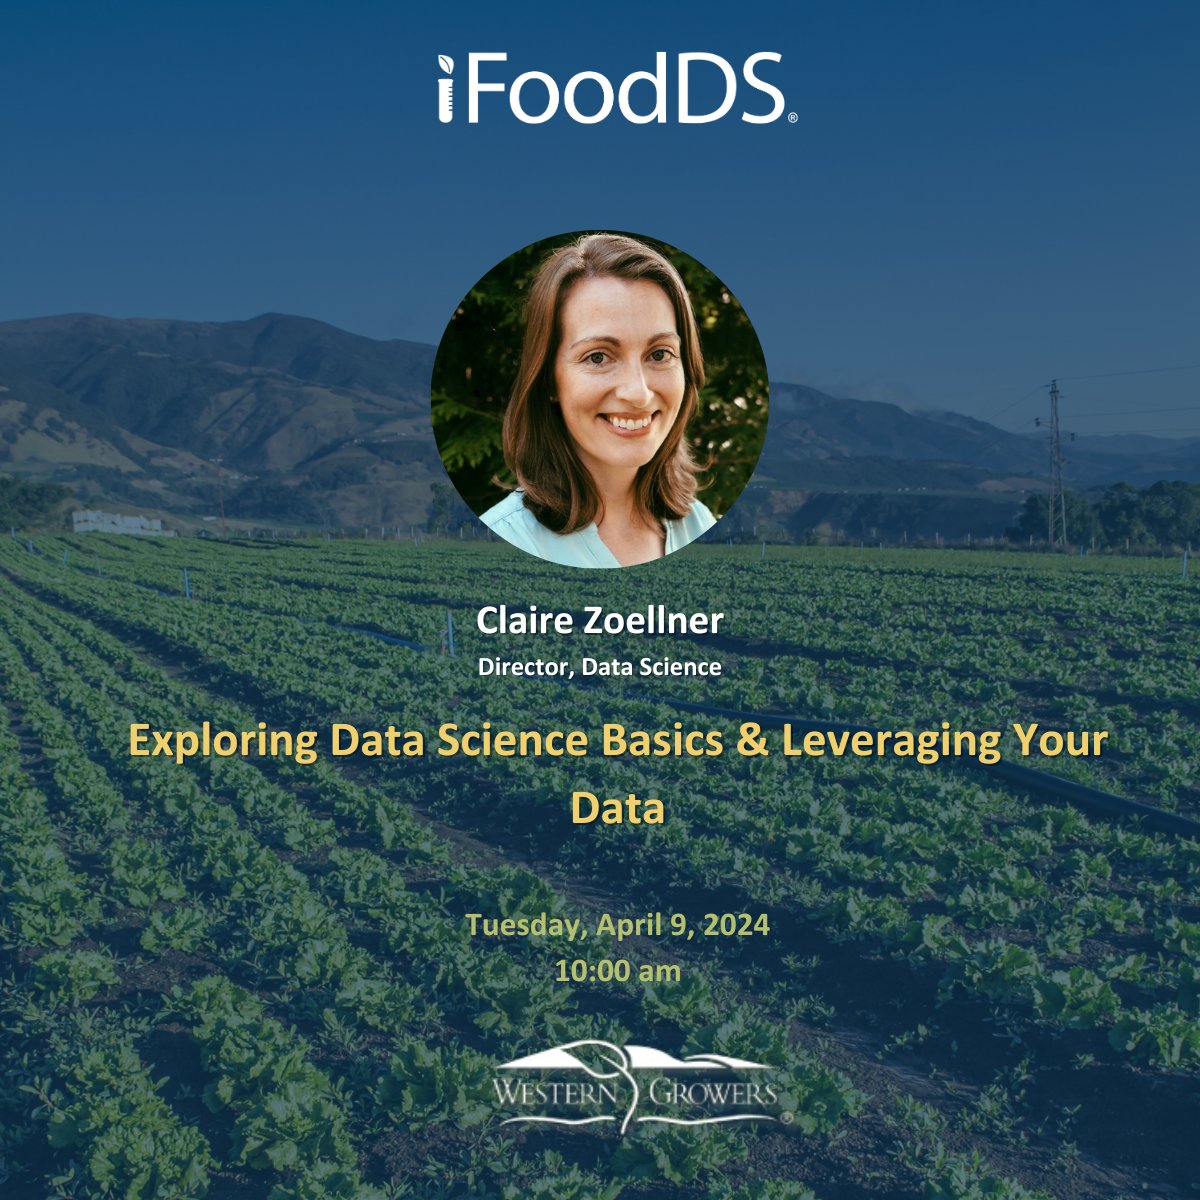 Our own @c_zoellner will participate as a panelist tomorrow in the webinar by @WesternGrowers “Exploring Data Science Basics & Leveraging Your Data”. The webinar will unpack data science fundamentals, and provide industry insights on how to best leverage data for food safety.